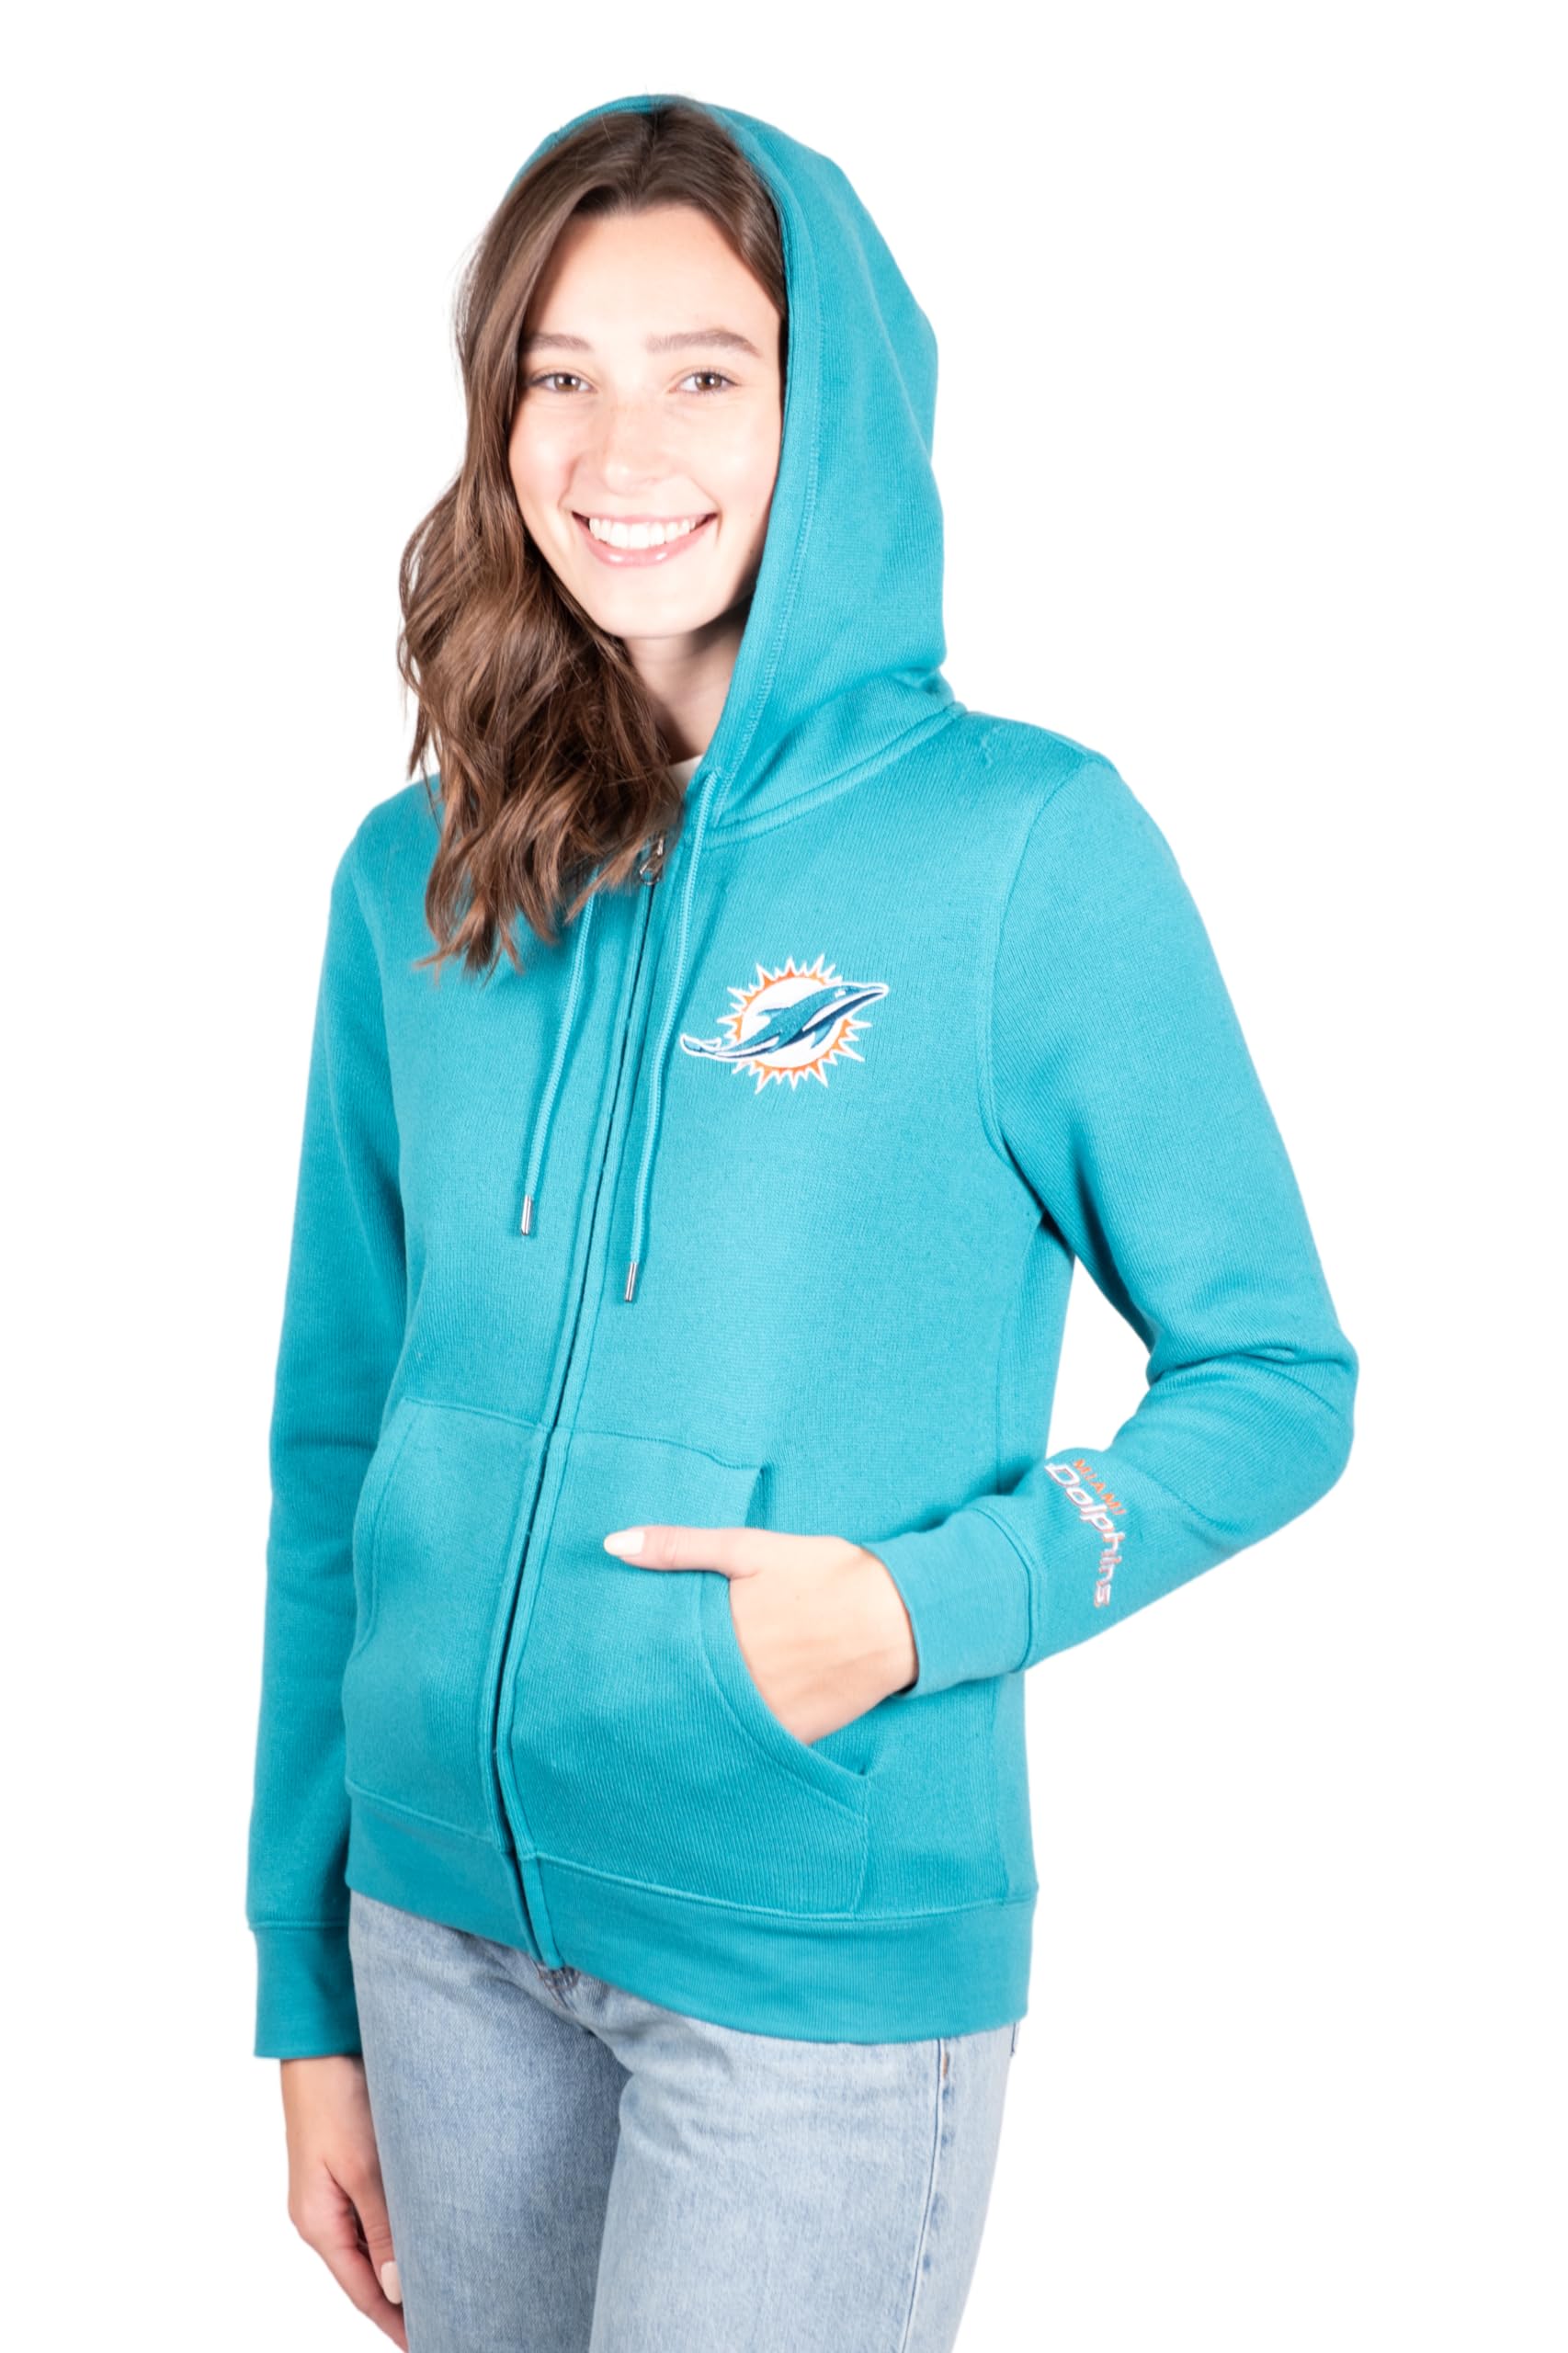 Ultra Game NFL Miami Dolphins Womens Full Zip Soft Marl Knit Hoodie Sweatshirt Jacket|Miami Dolphins